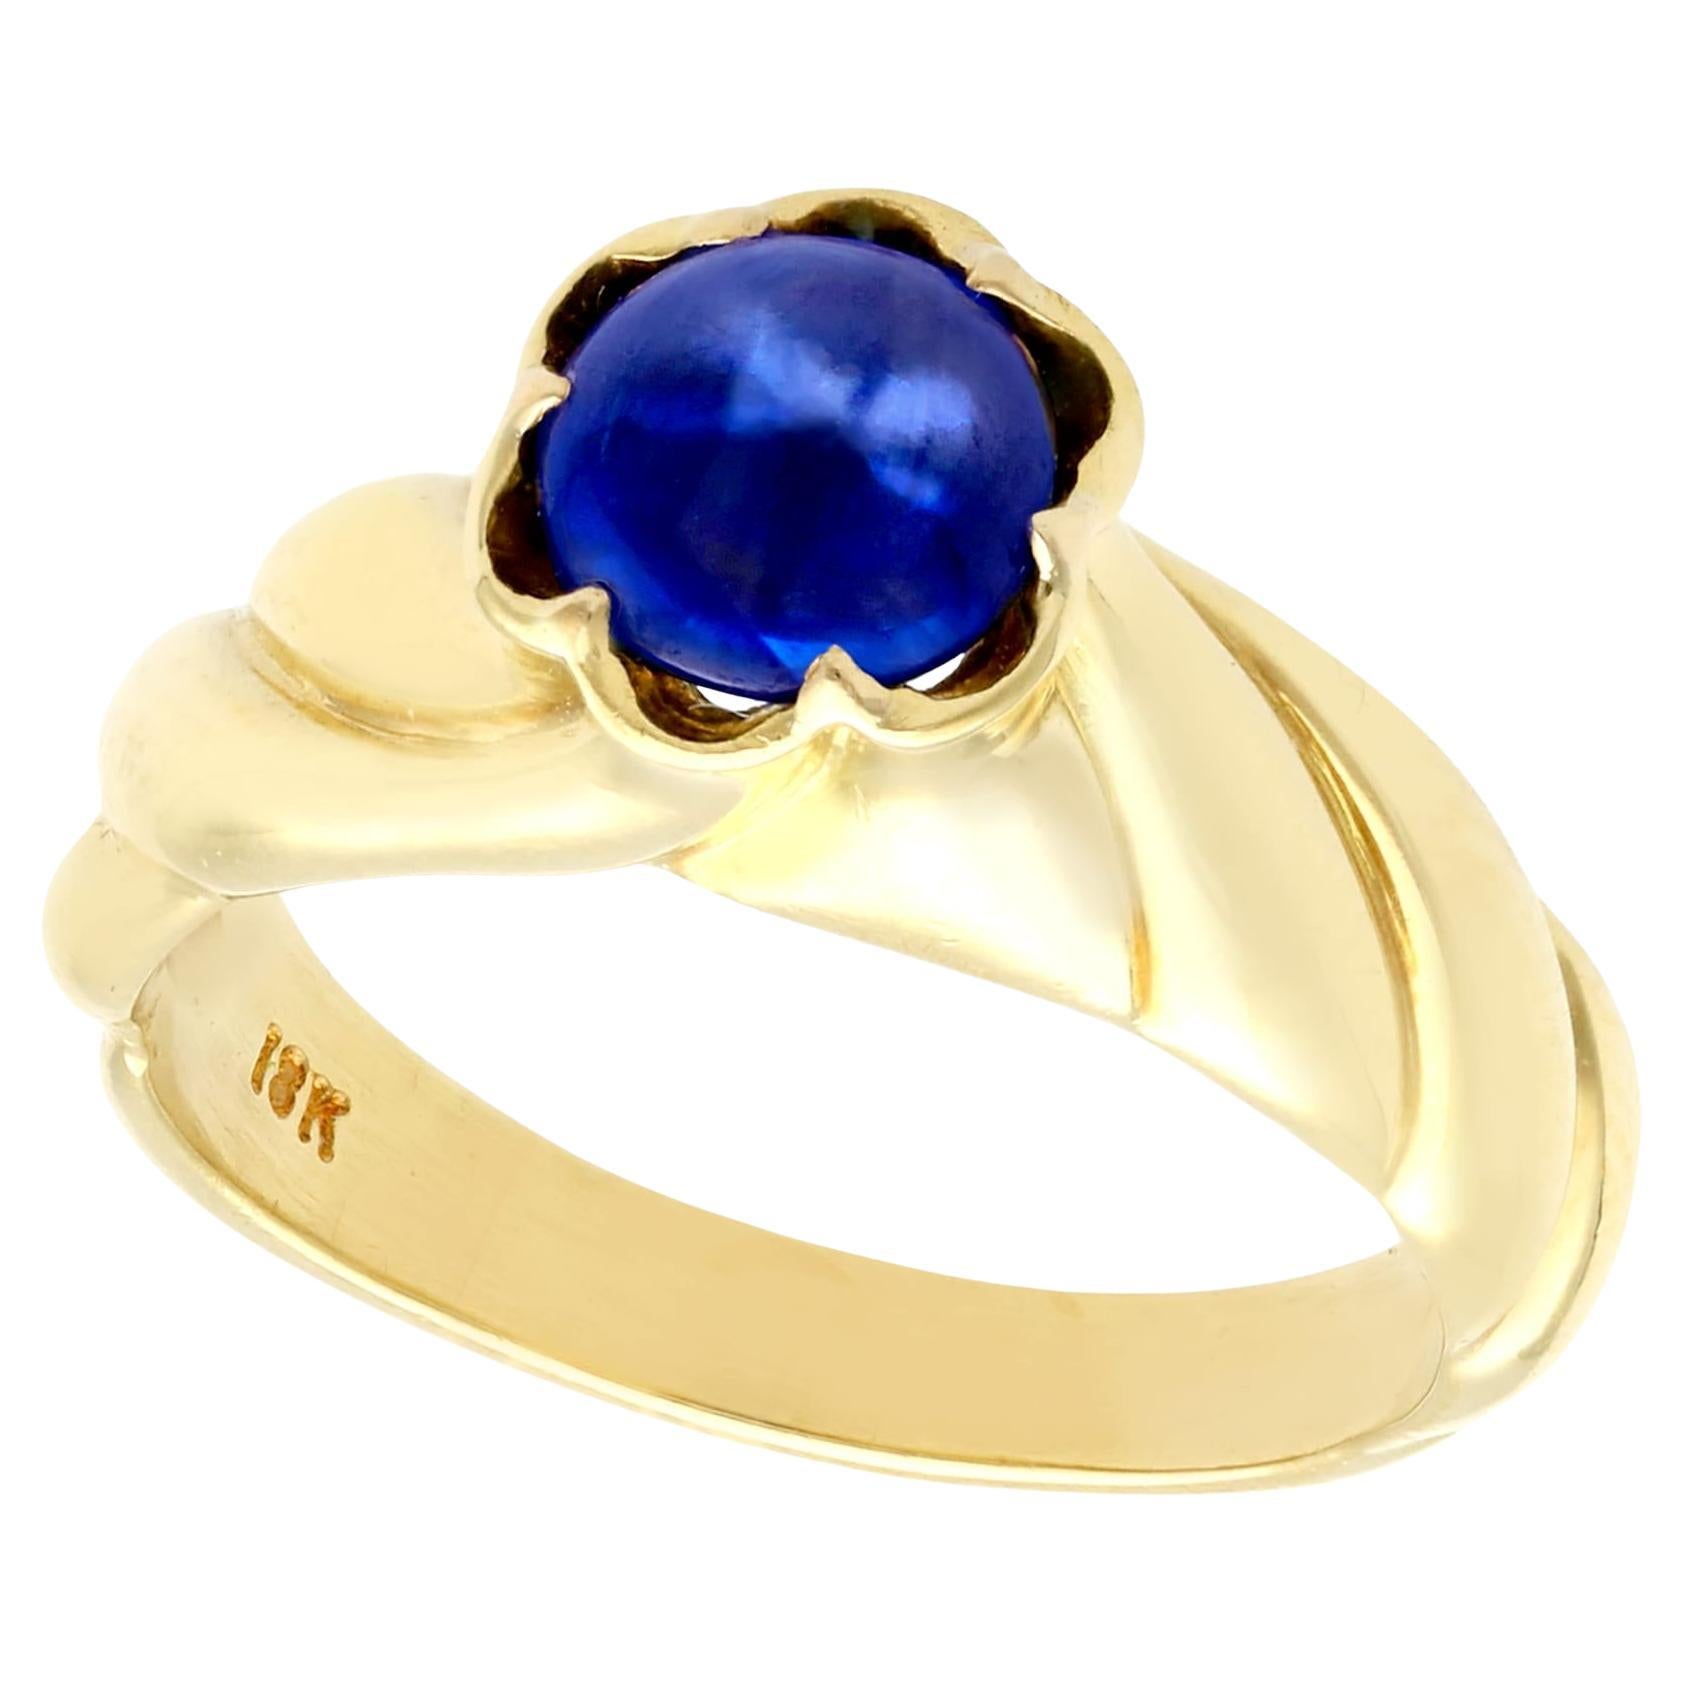 1980s 1.22 Carat Cabochon Cut Sapphire 18 K Yellow Gold Cocktail Ring For Sale